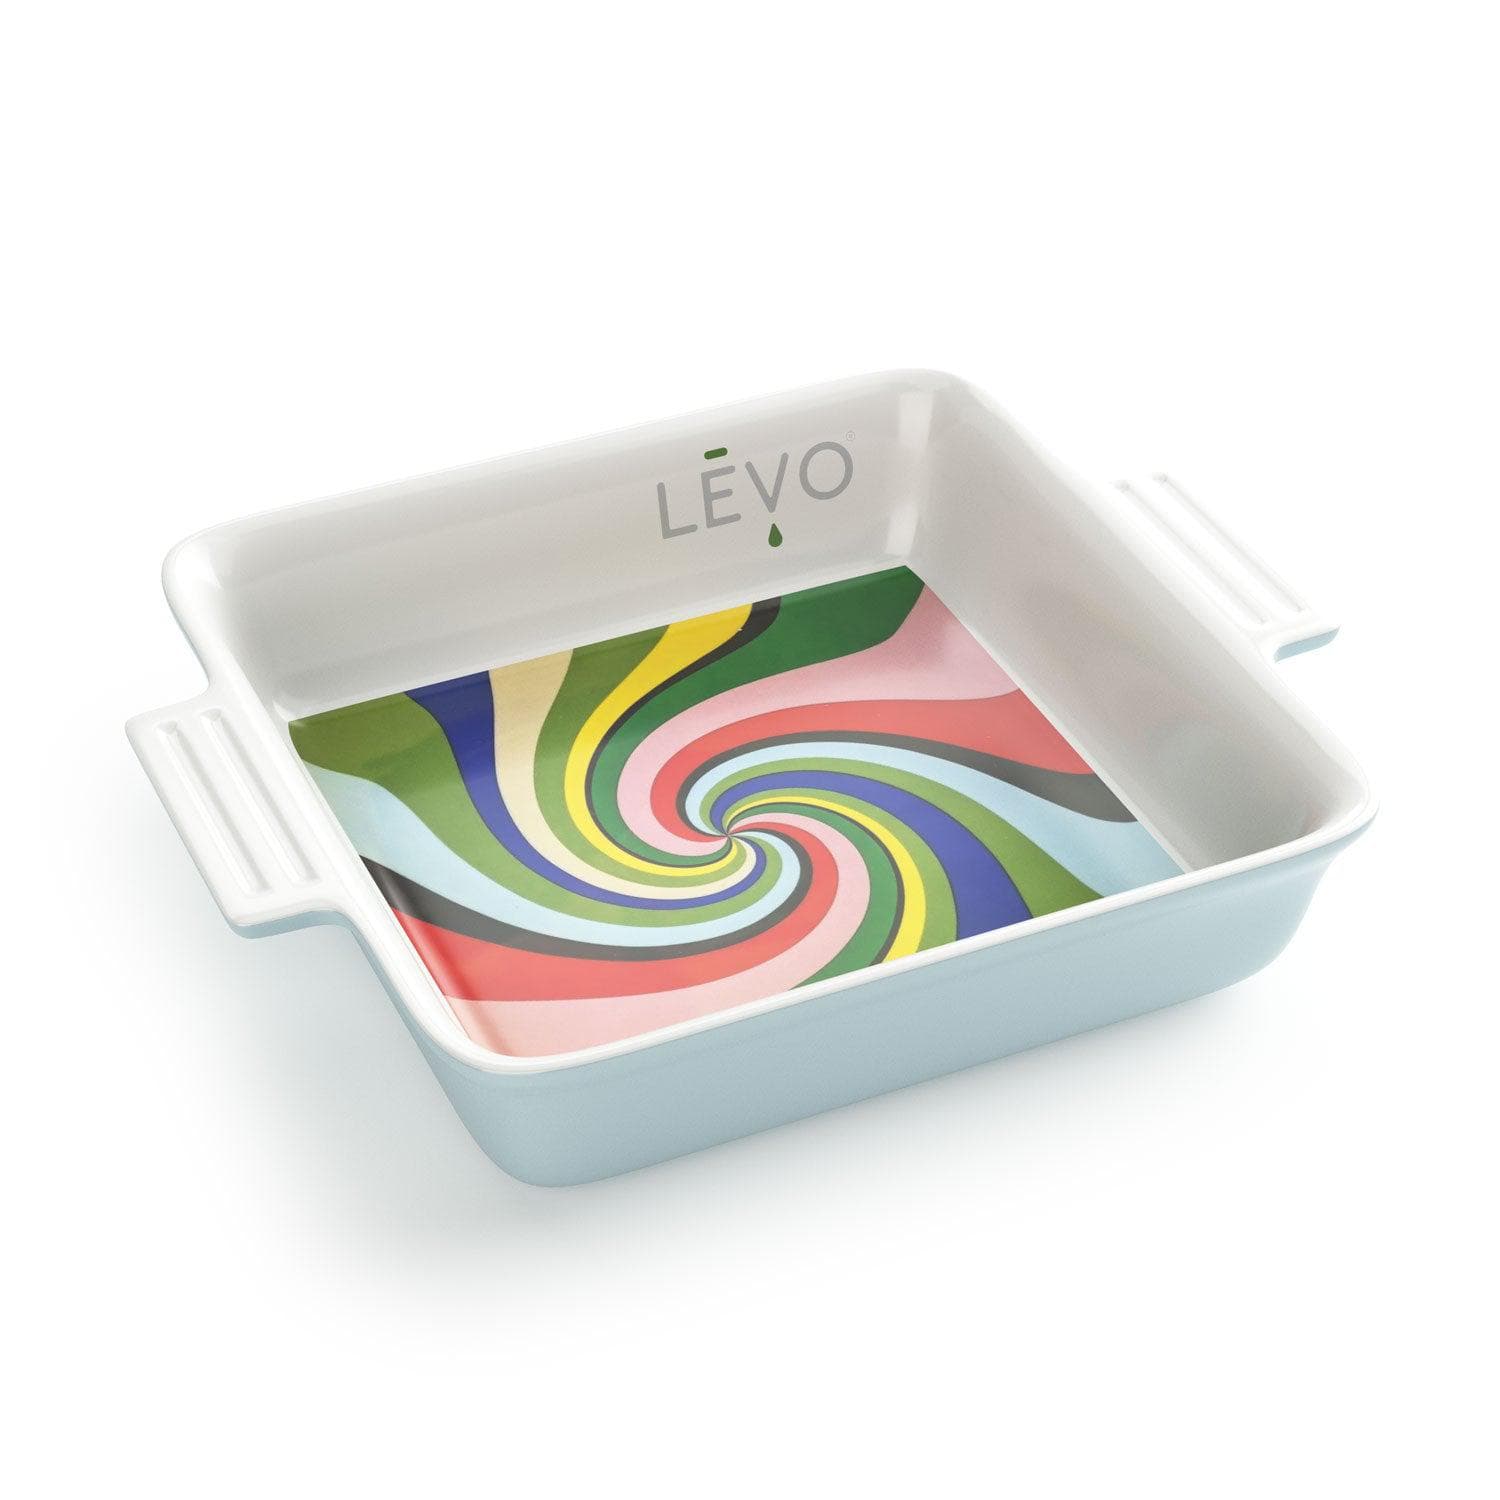 LEVO Porcelain Baking Dish with multicolor swirl decal and logo